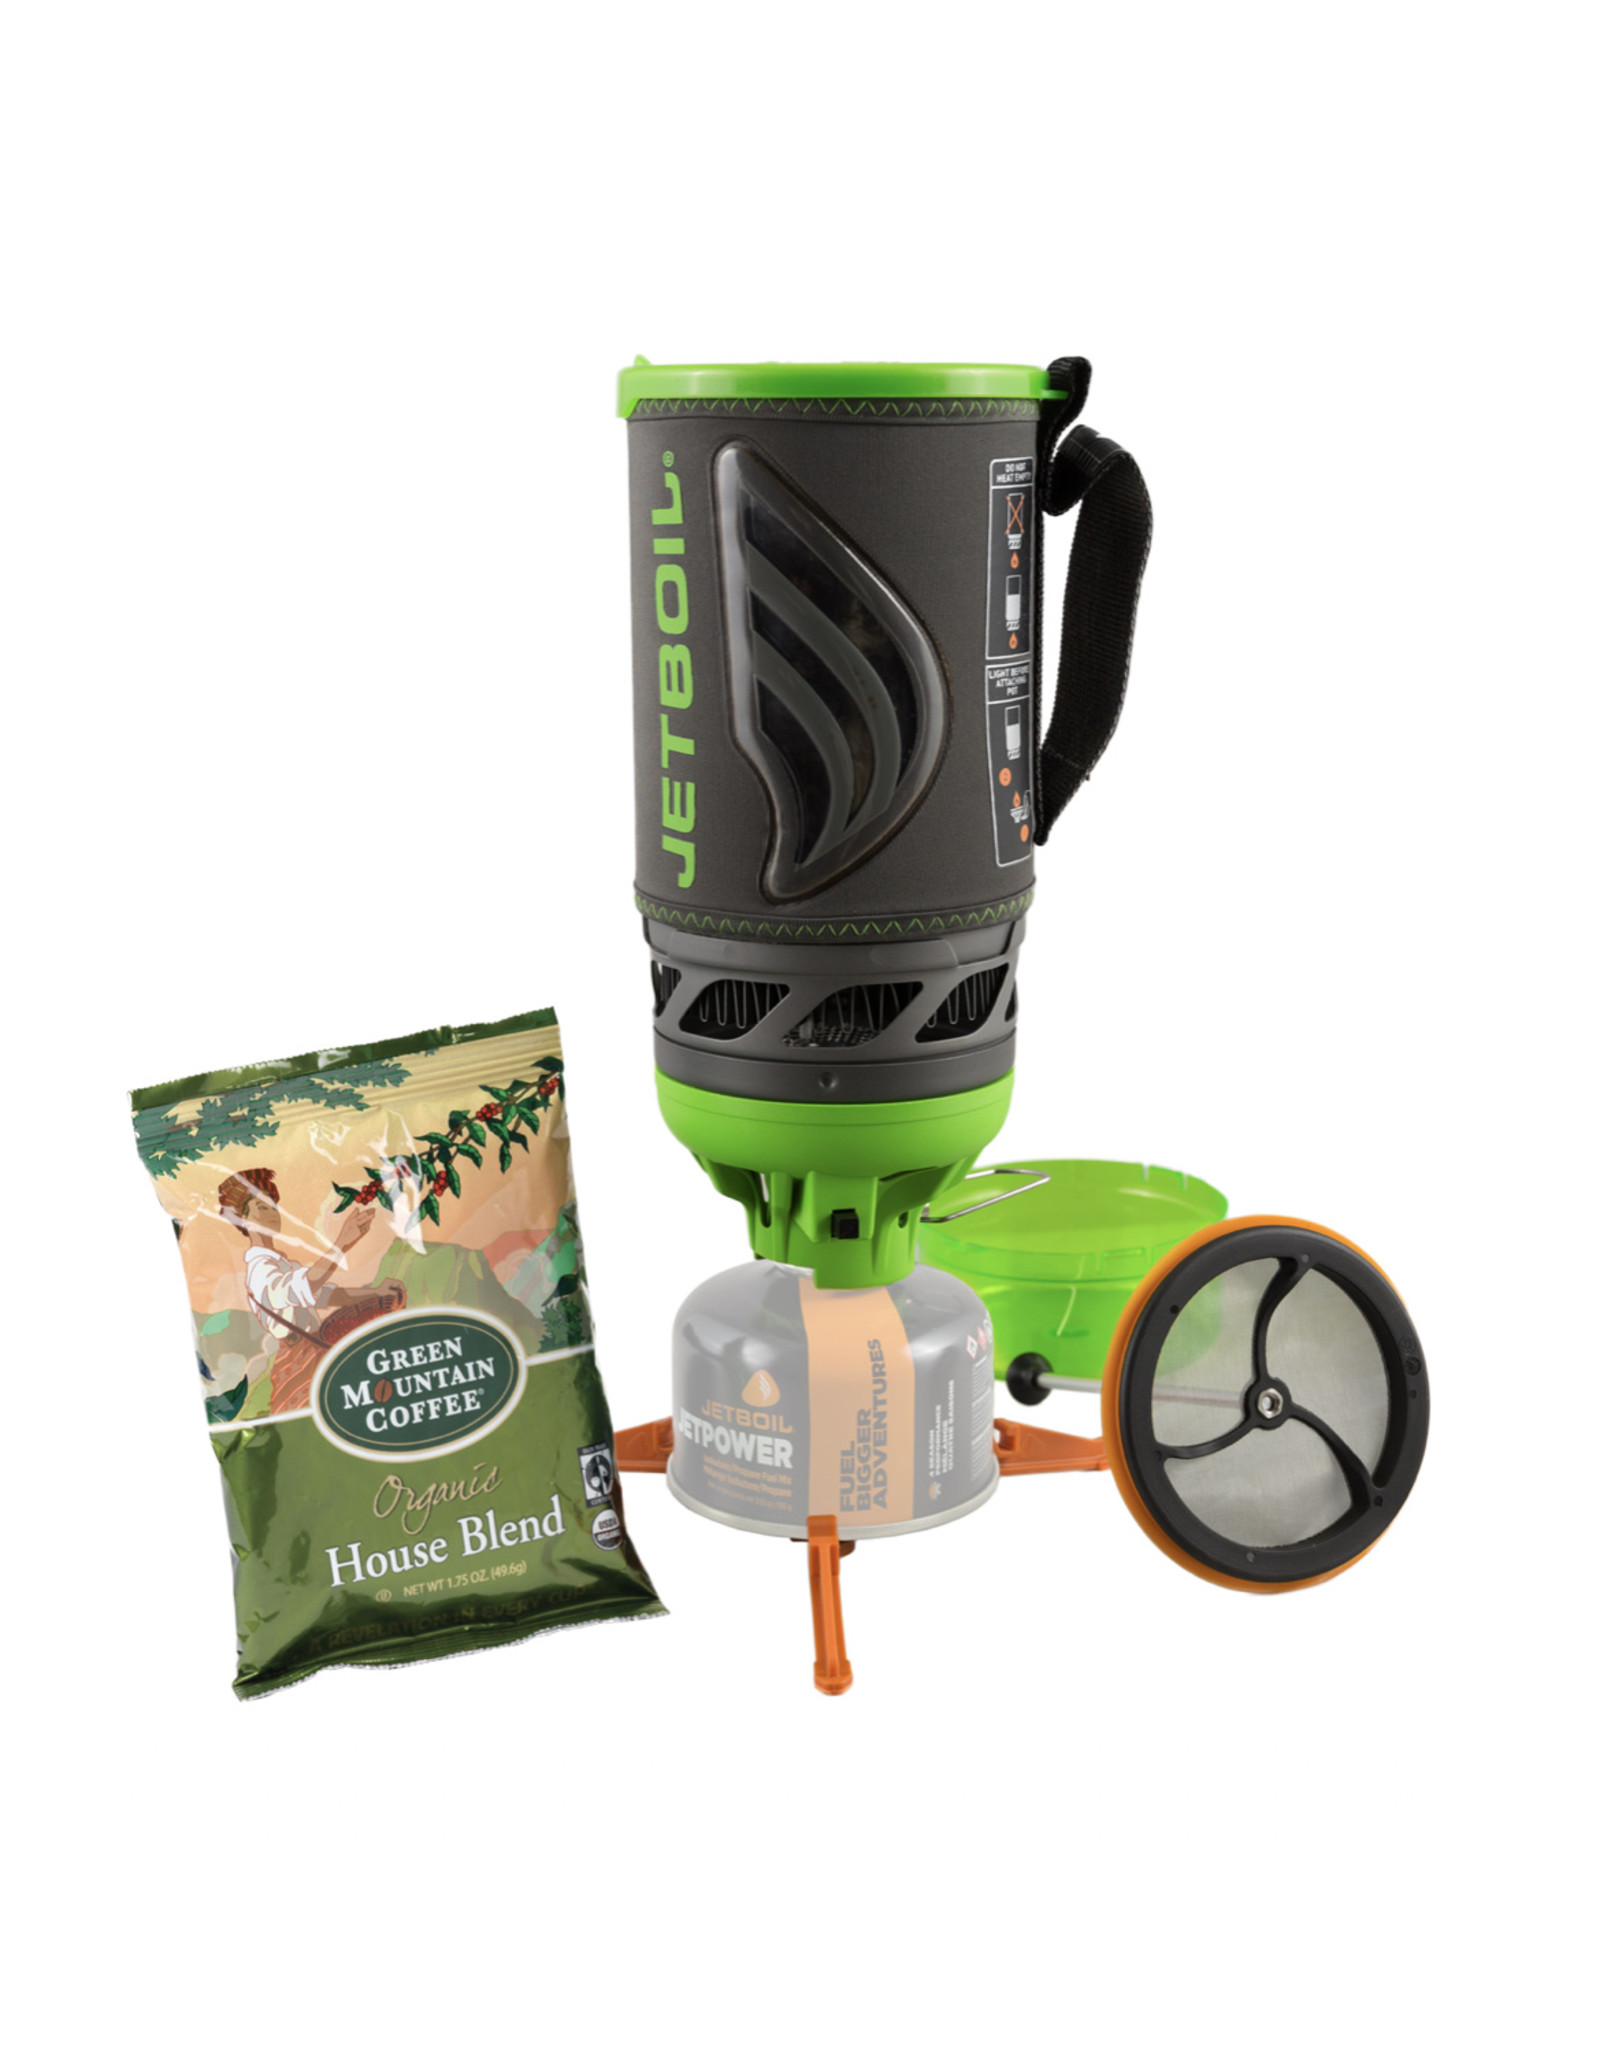 JETBOIL FLASH JAVA ECTO COOKING SYSTEM